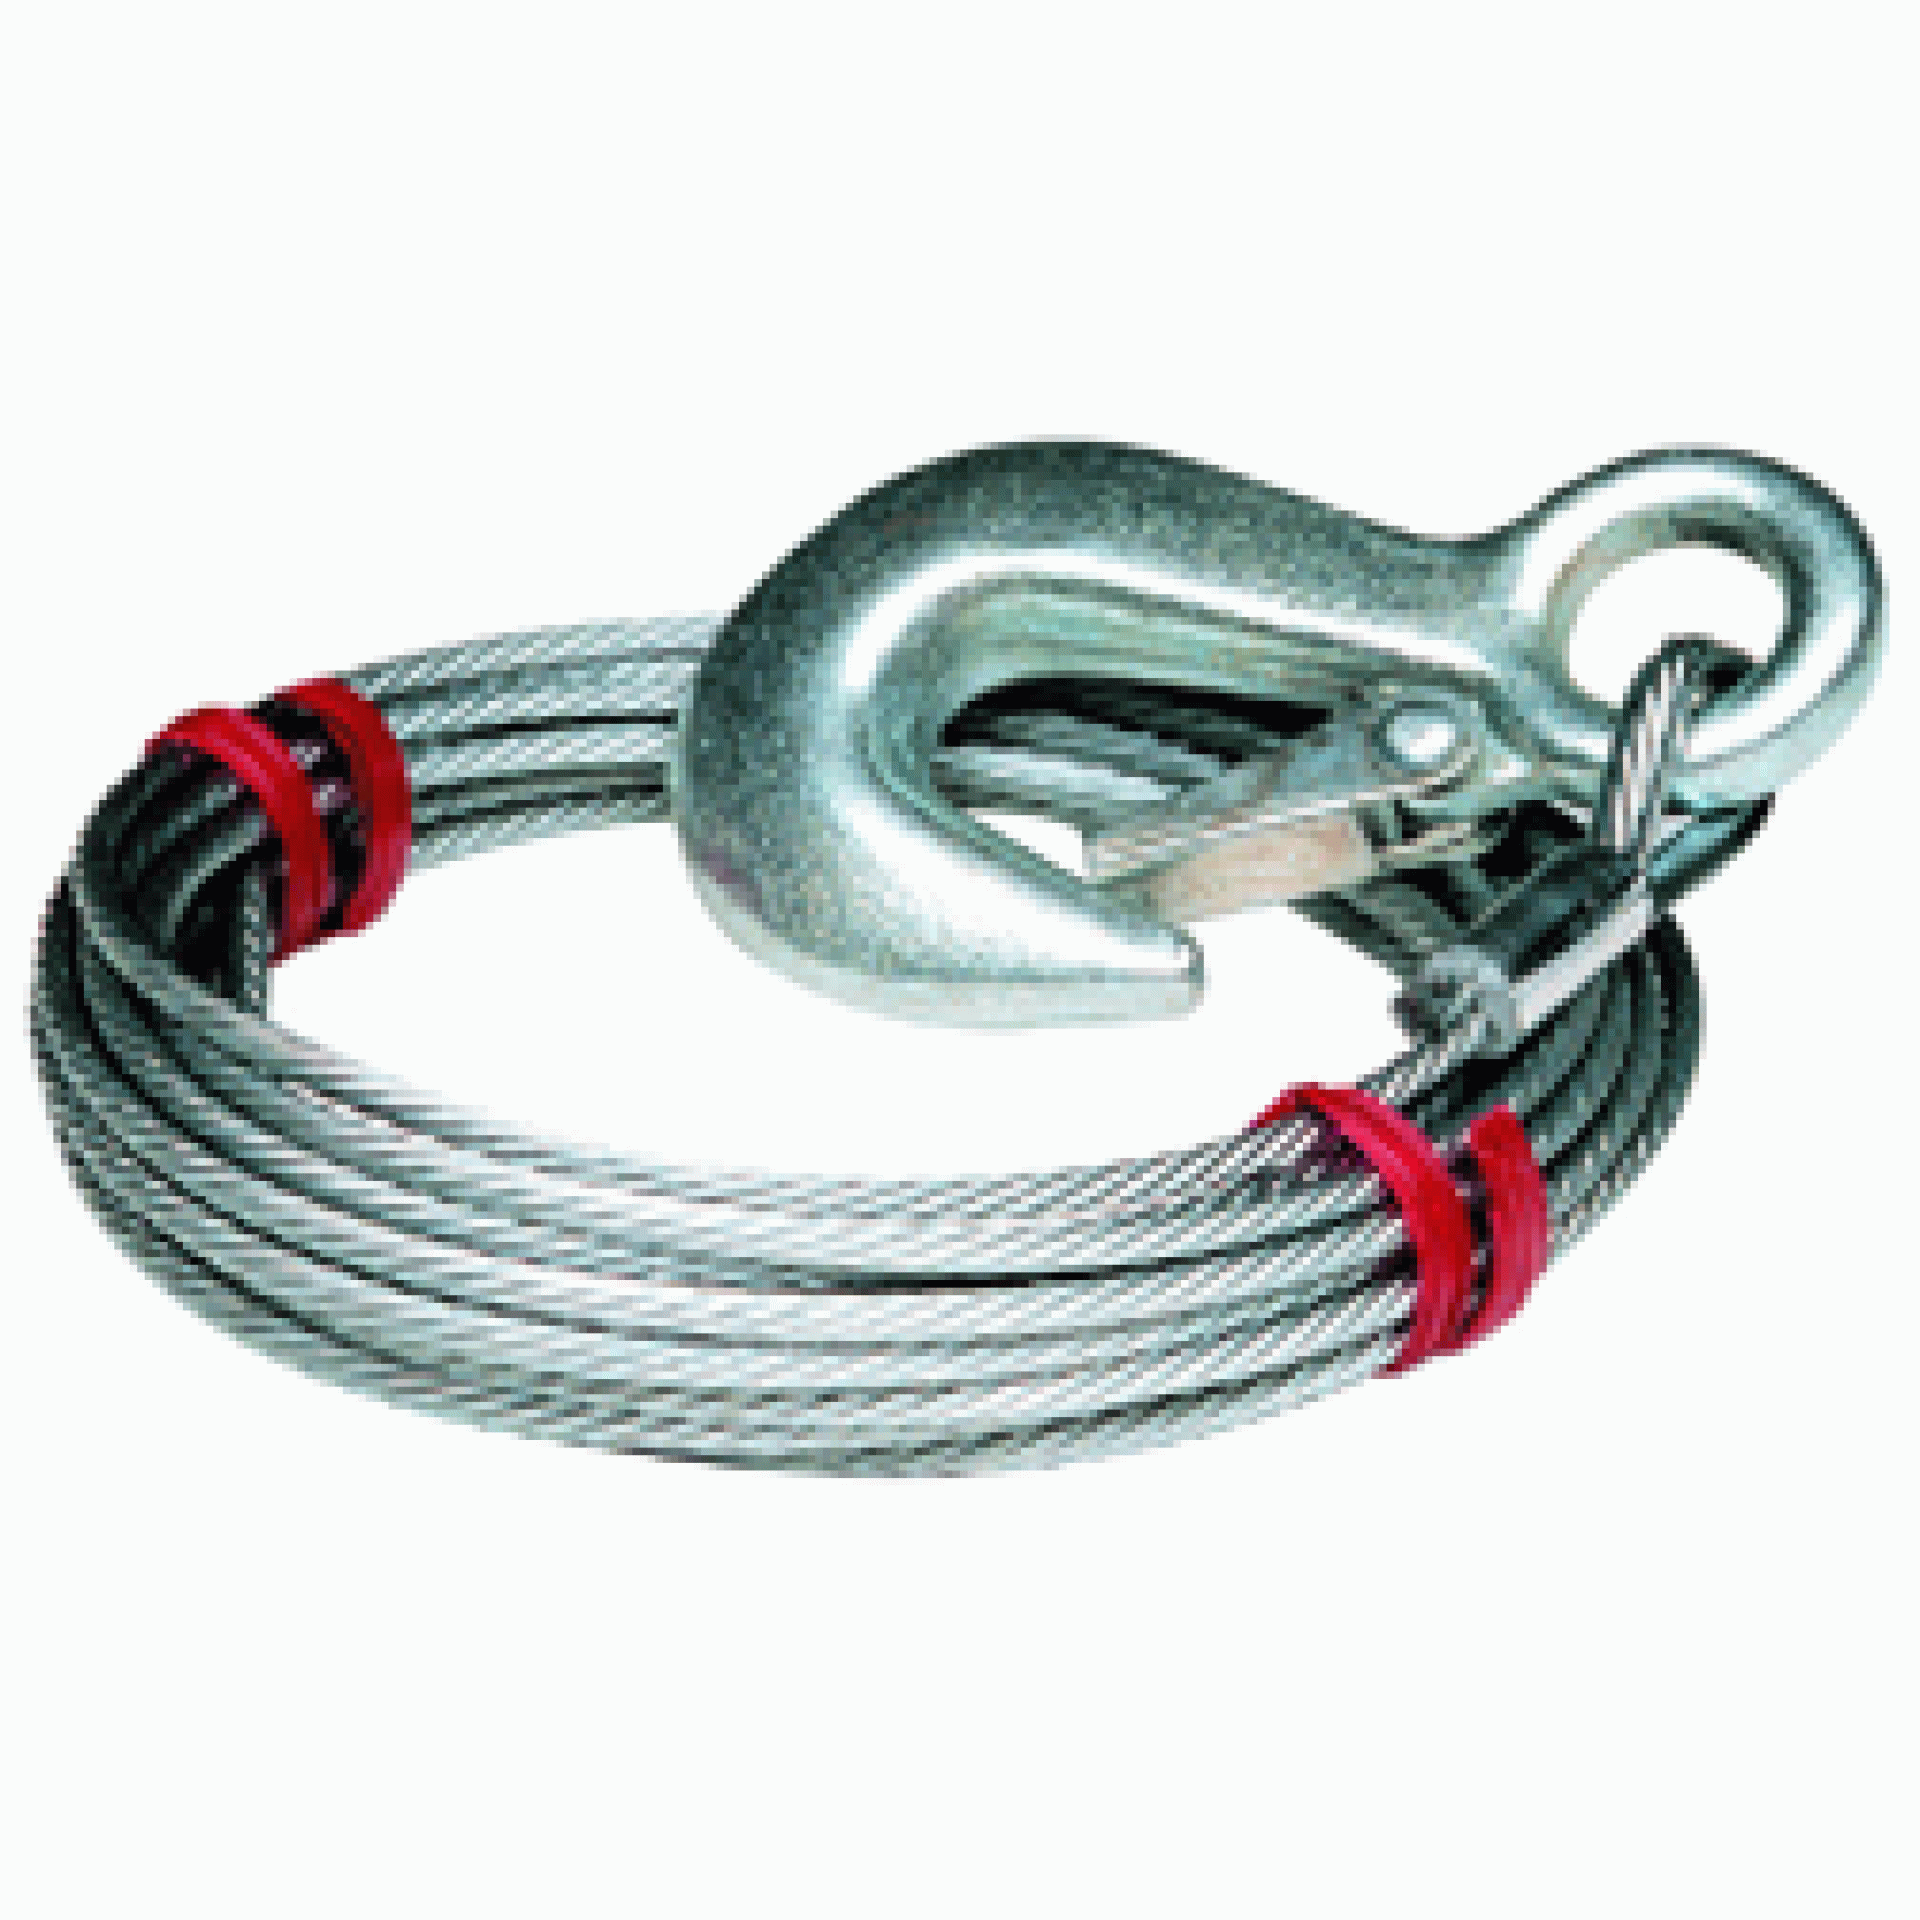 TIE DOWN ENGINEERING INC | 59385 | WINCH CABLE 3/16" X 25' 4200 LB